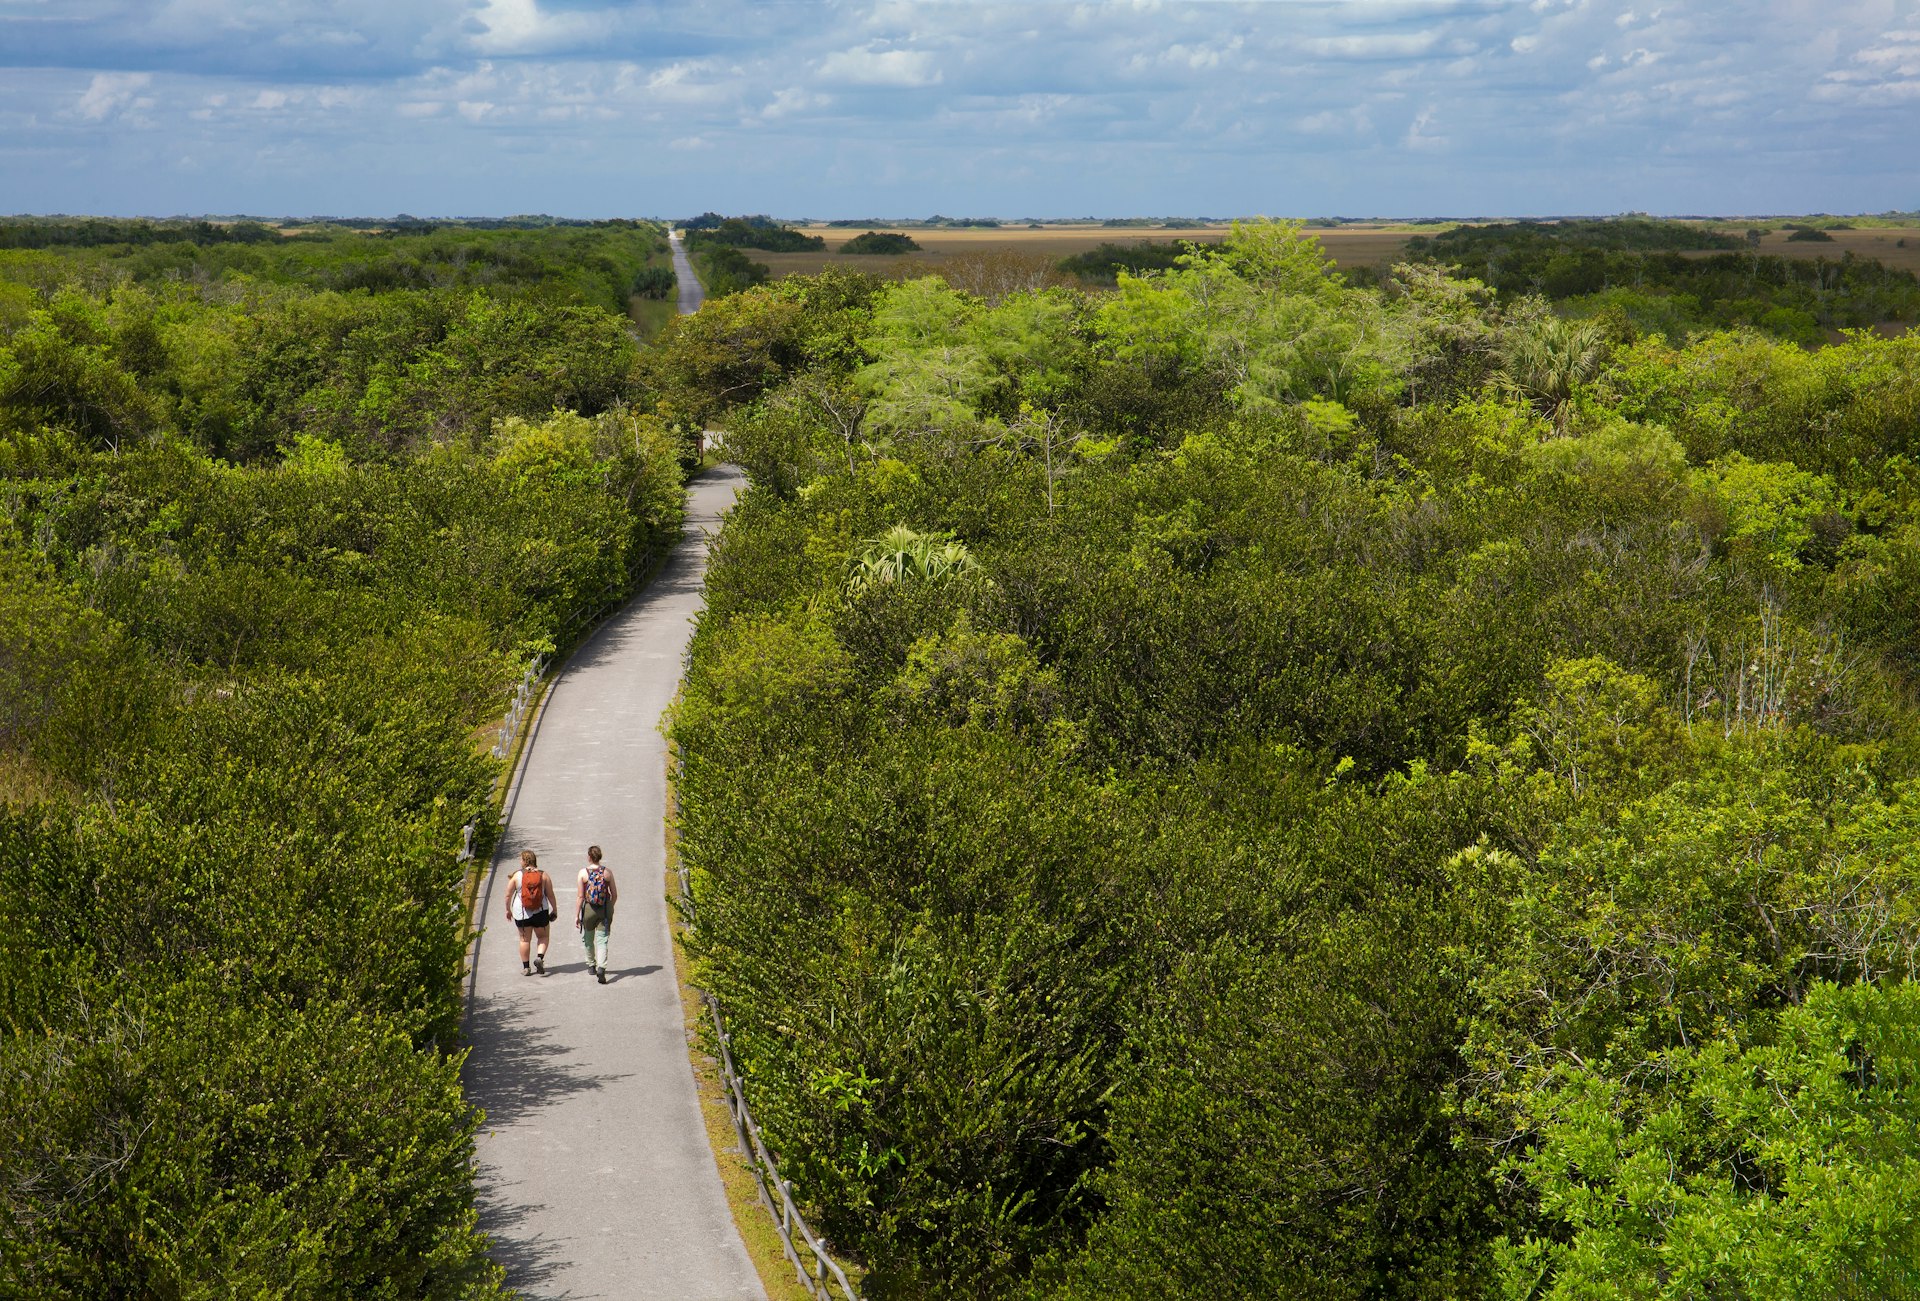 Two hikers stroll down a straight path that cuts through the dense undergrowth of Everglades National Park